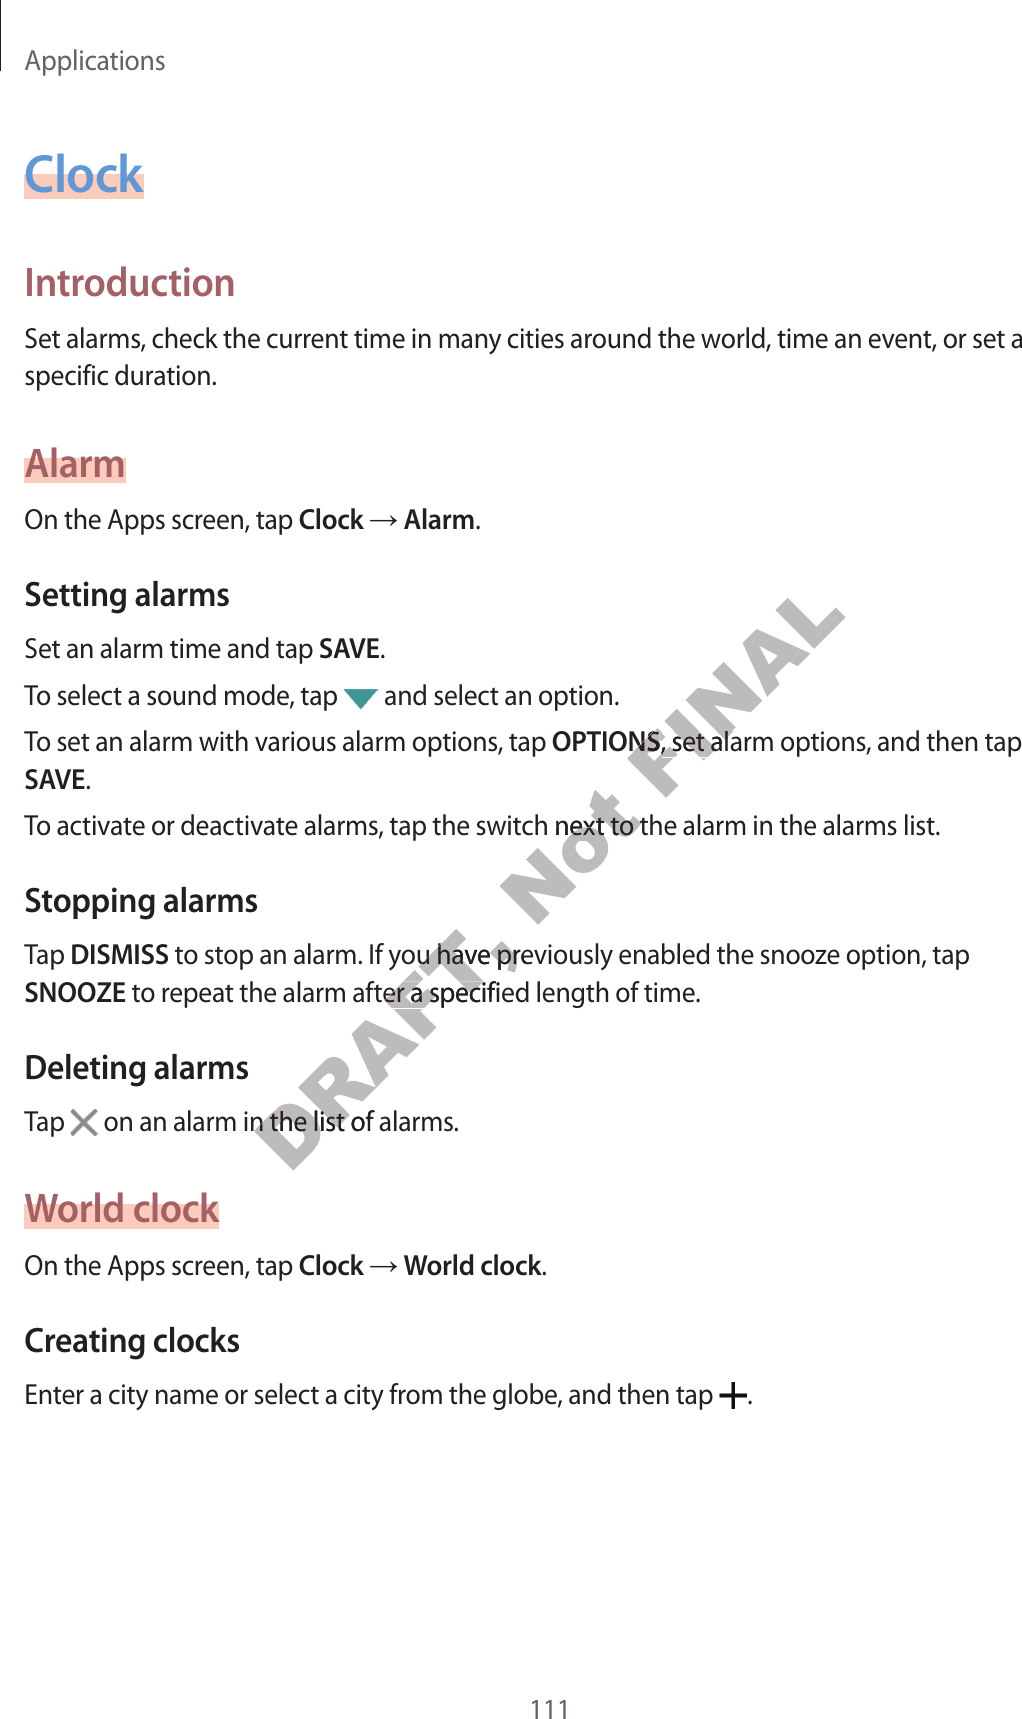 Applications111ClockIntroductionSet alarms, check the current time in many cities around the world, time an event, or set a specific duration.AlarmOn the Apps screen, tap Clock  Alarm.Setting alarmsSet an alarm time and tap SAVE.To select a sound mode, tap   and select an option.To set an alarm with various alarm options, tap OPTIONS, set alarm options, and then tap SAVE.To activate or deactivate alarms, tap the switch next to the alarm in the alarms list.Stopping alarmsTap DISMISS to stop an alarm. If you have previously enabled the snooze option, tap SNOOZE to repeat the alarm after a specified length of time.Deleting alarmsTap   on an alarm in the list of alarms.World clockOn the Apps screen, tap Clock  World clock.Creating clocksEnter a city name or select a city from the globe, and then tap  .f you have previously enabled the snoof you have previously enabled the snooDRAFT, m after a specified length of timem after a specified length of timem in the list of alarm in the list of alarNot , tap the switch next to the alarch next to the alarFINALOPTIONSOPTIONS, set alar, set alar